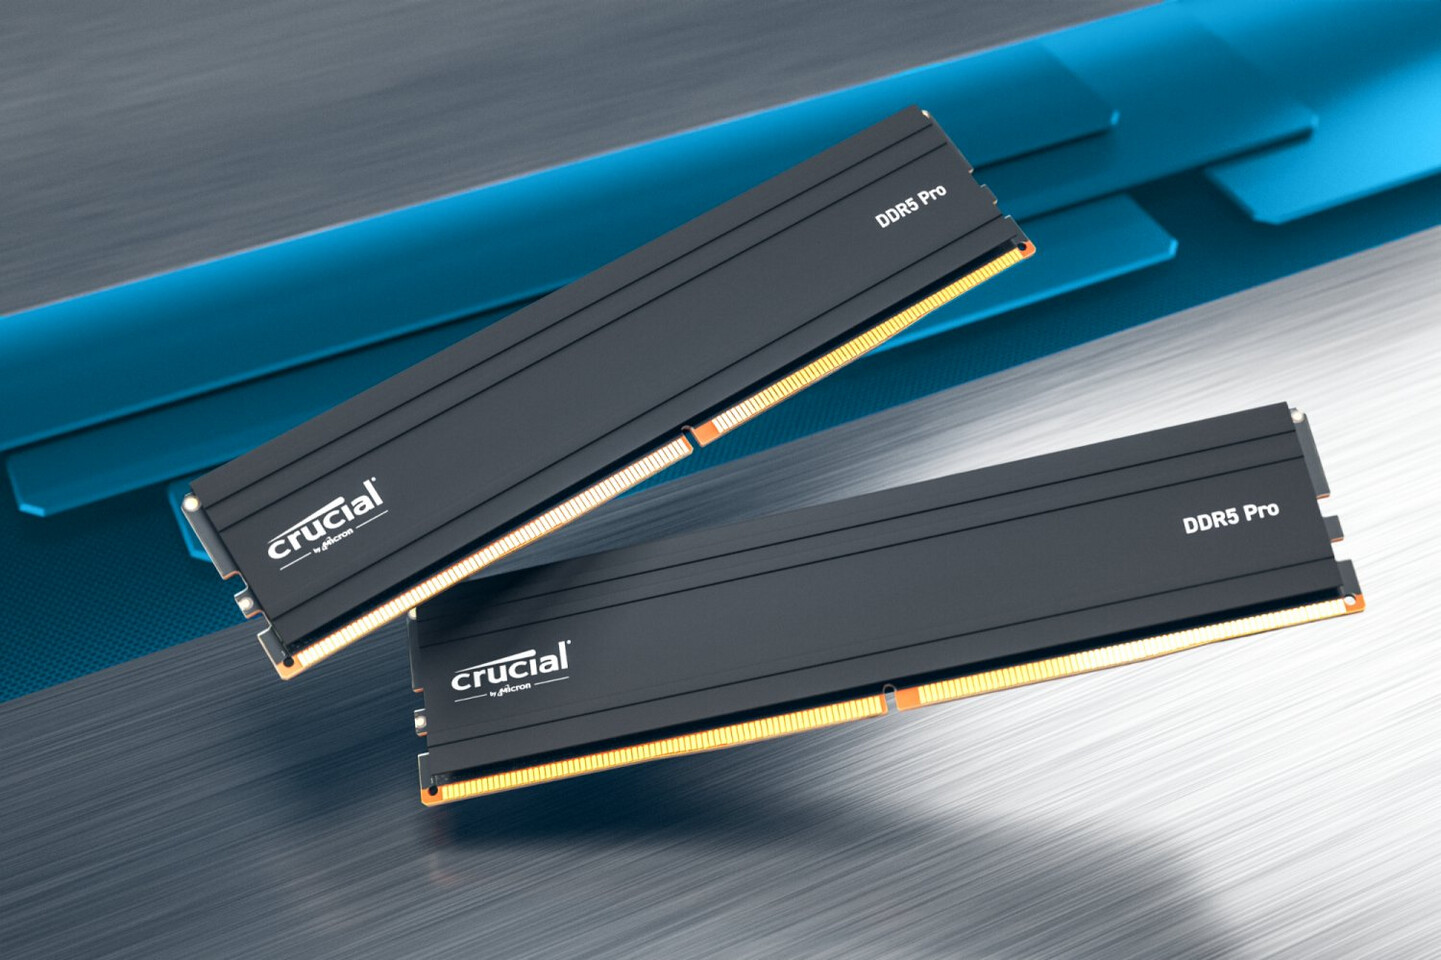 Crucial Launches the Pro Series Memory